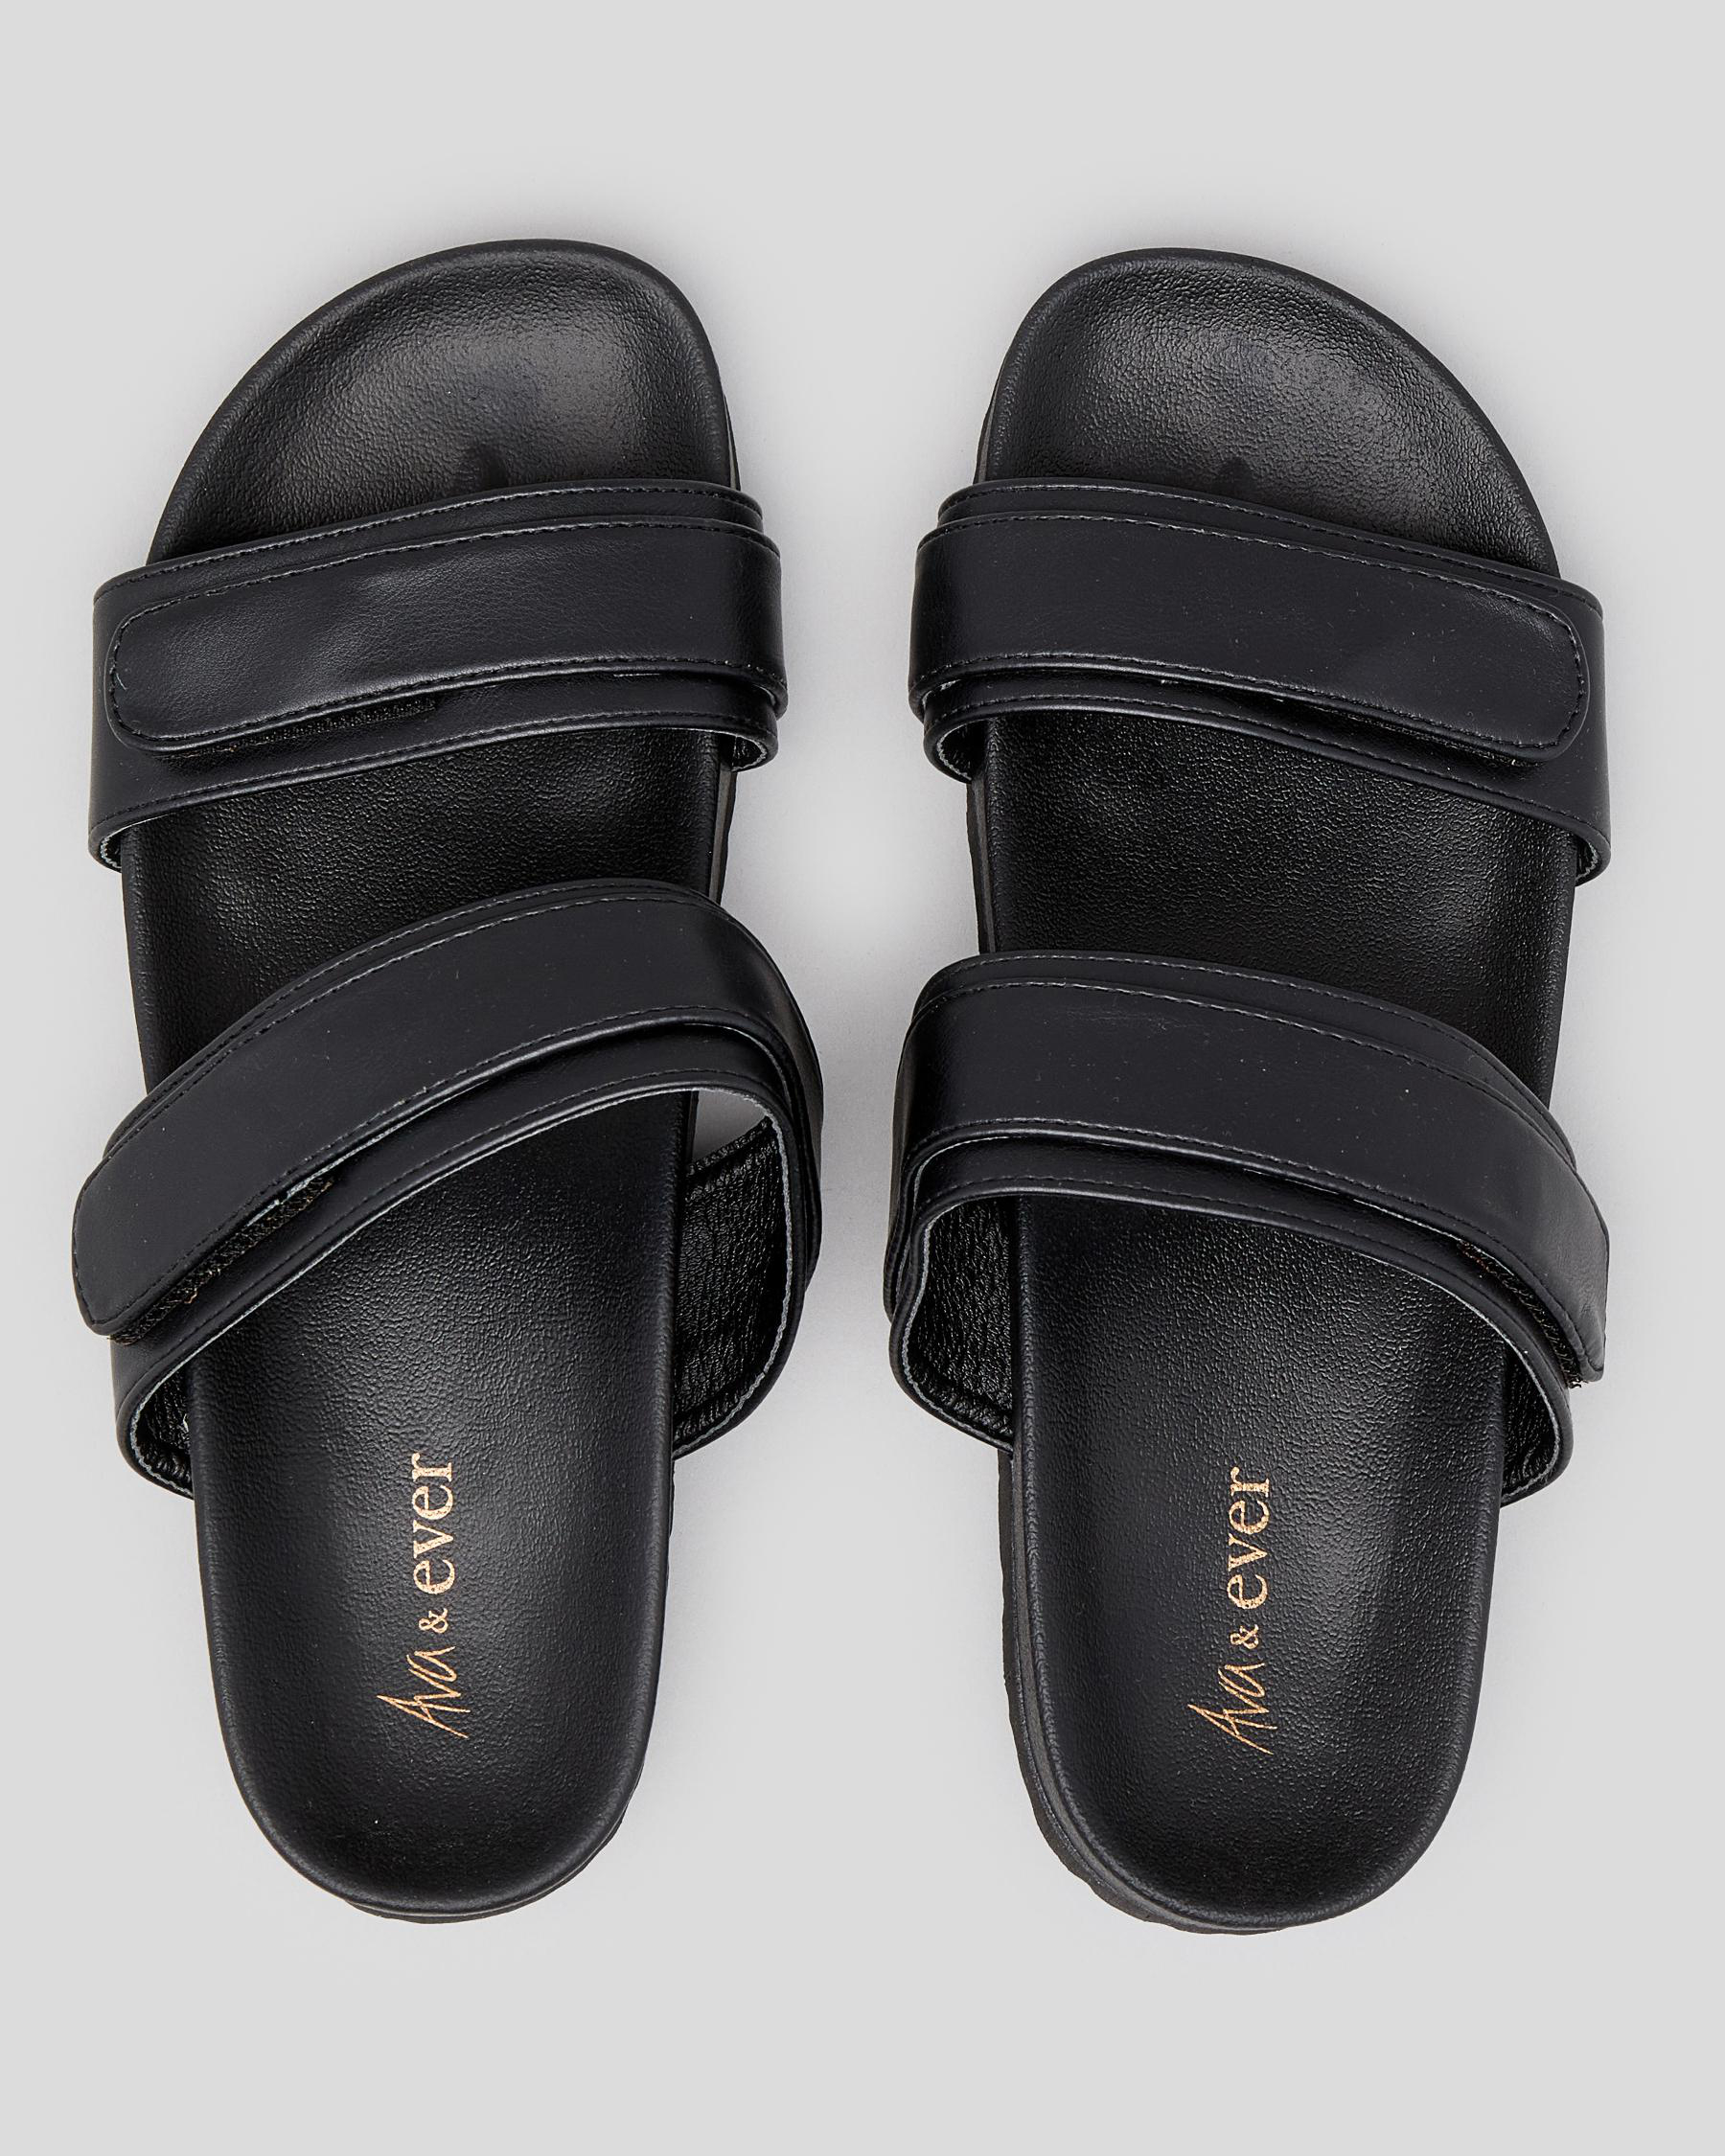 Ava And Ever Rocco Slide Sandals In Black/black - Fast Shipping & Easy ...